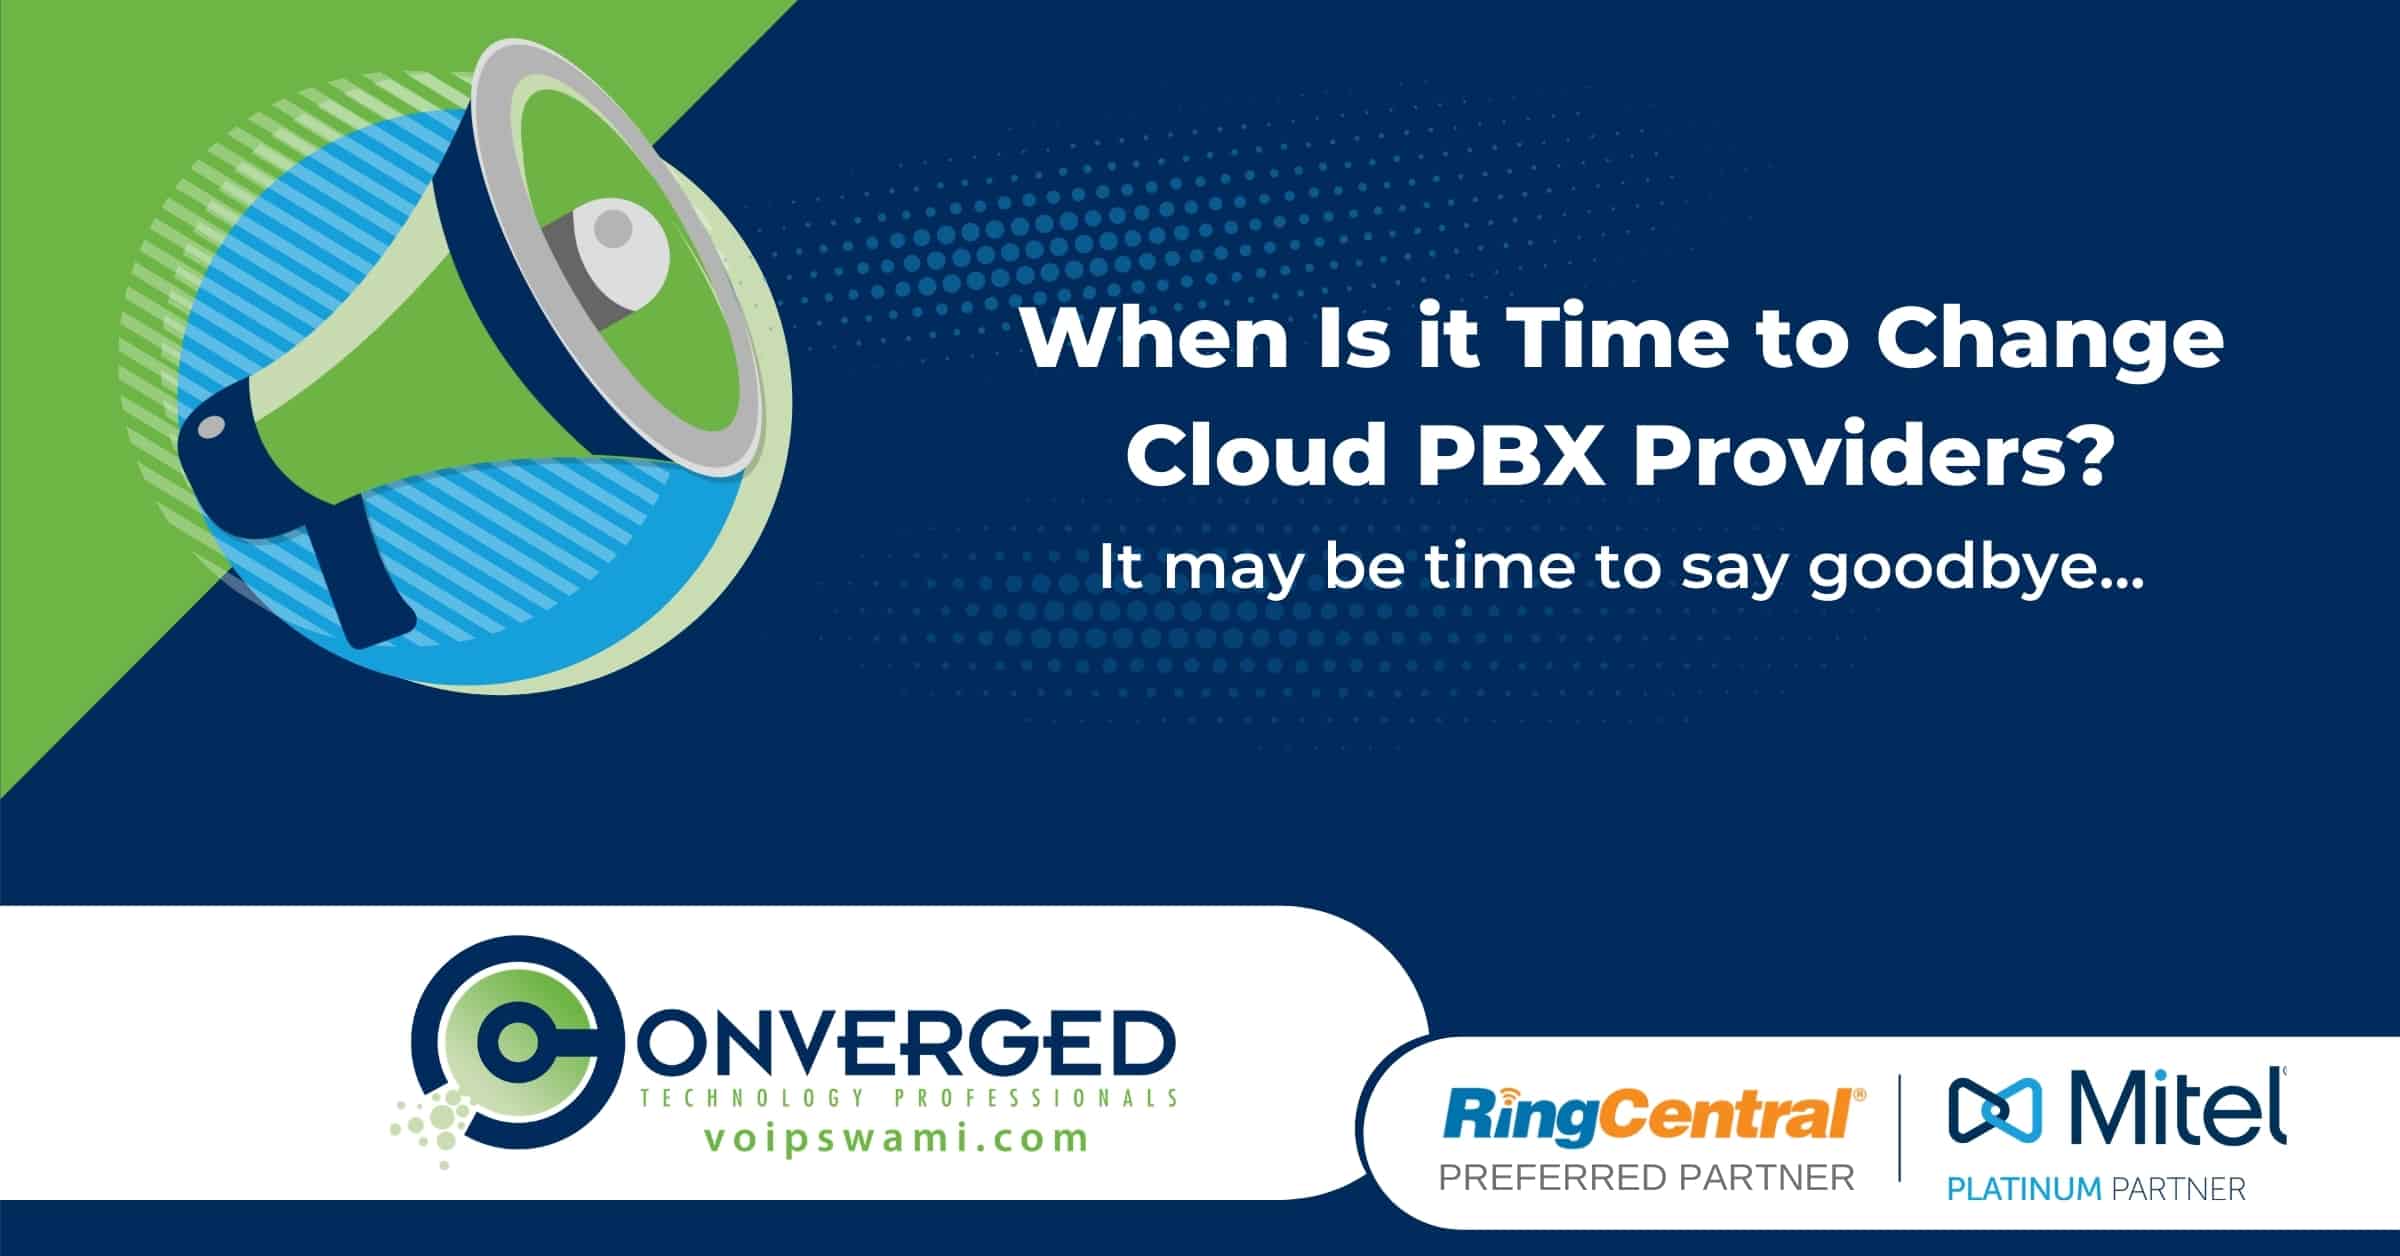 When is it Time to Change Cloud PBX Providers?